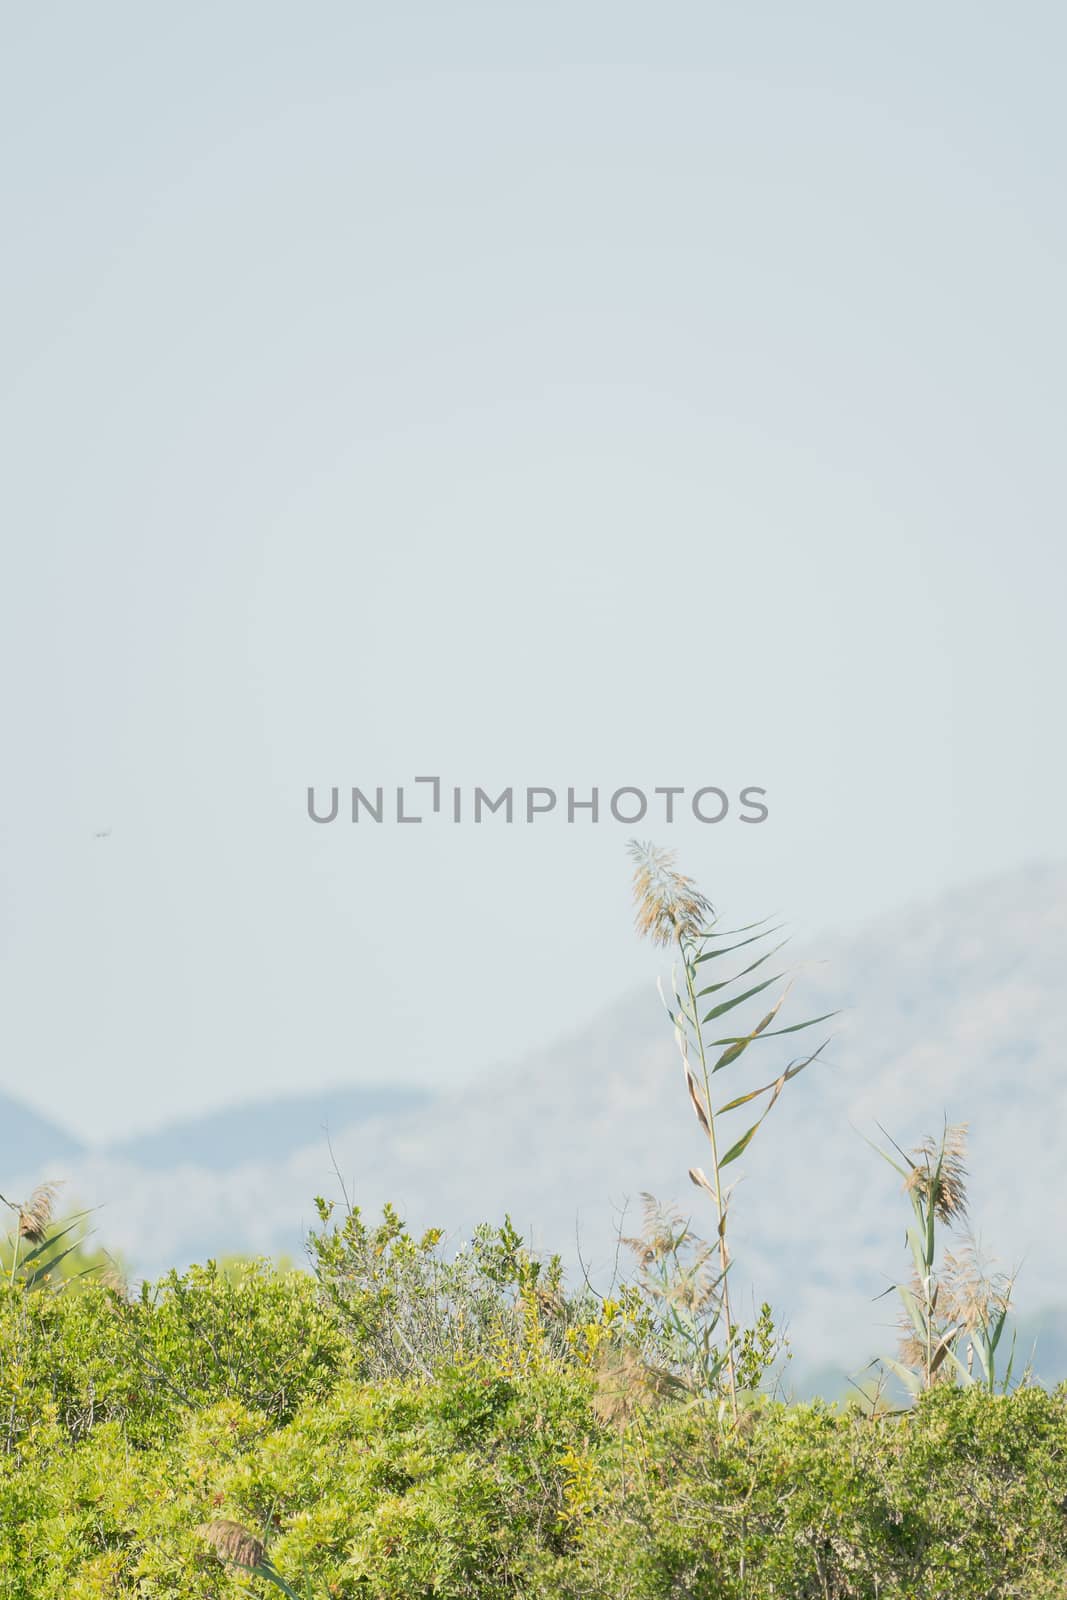 Grass in the foreground, sky and mountains in the background, vertical format